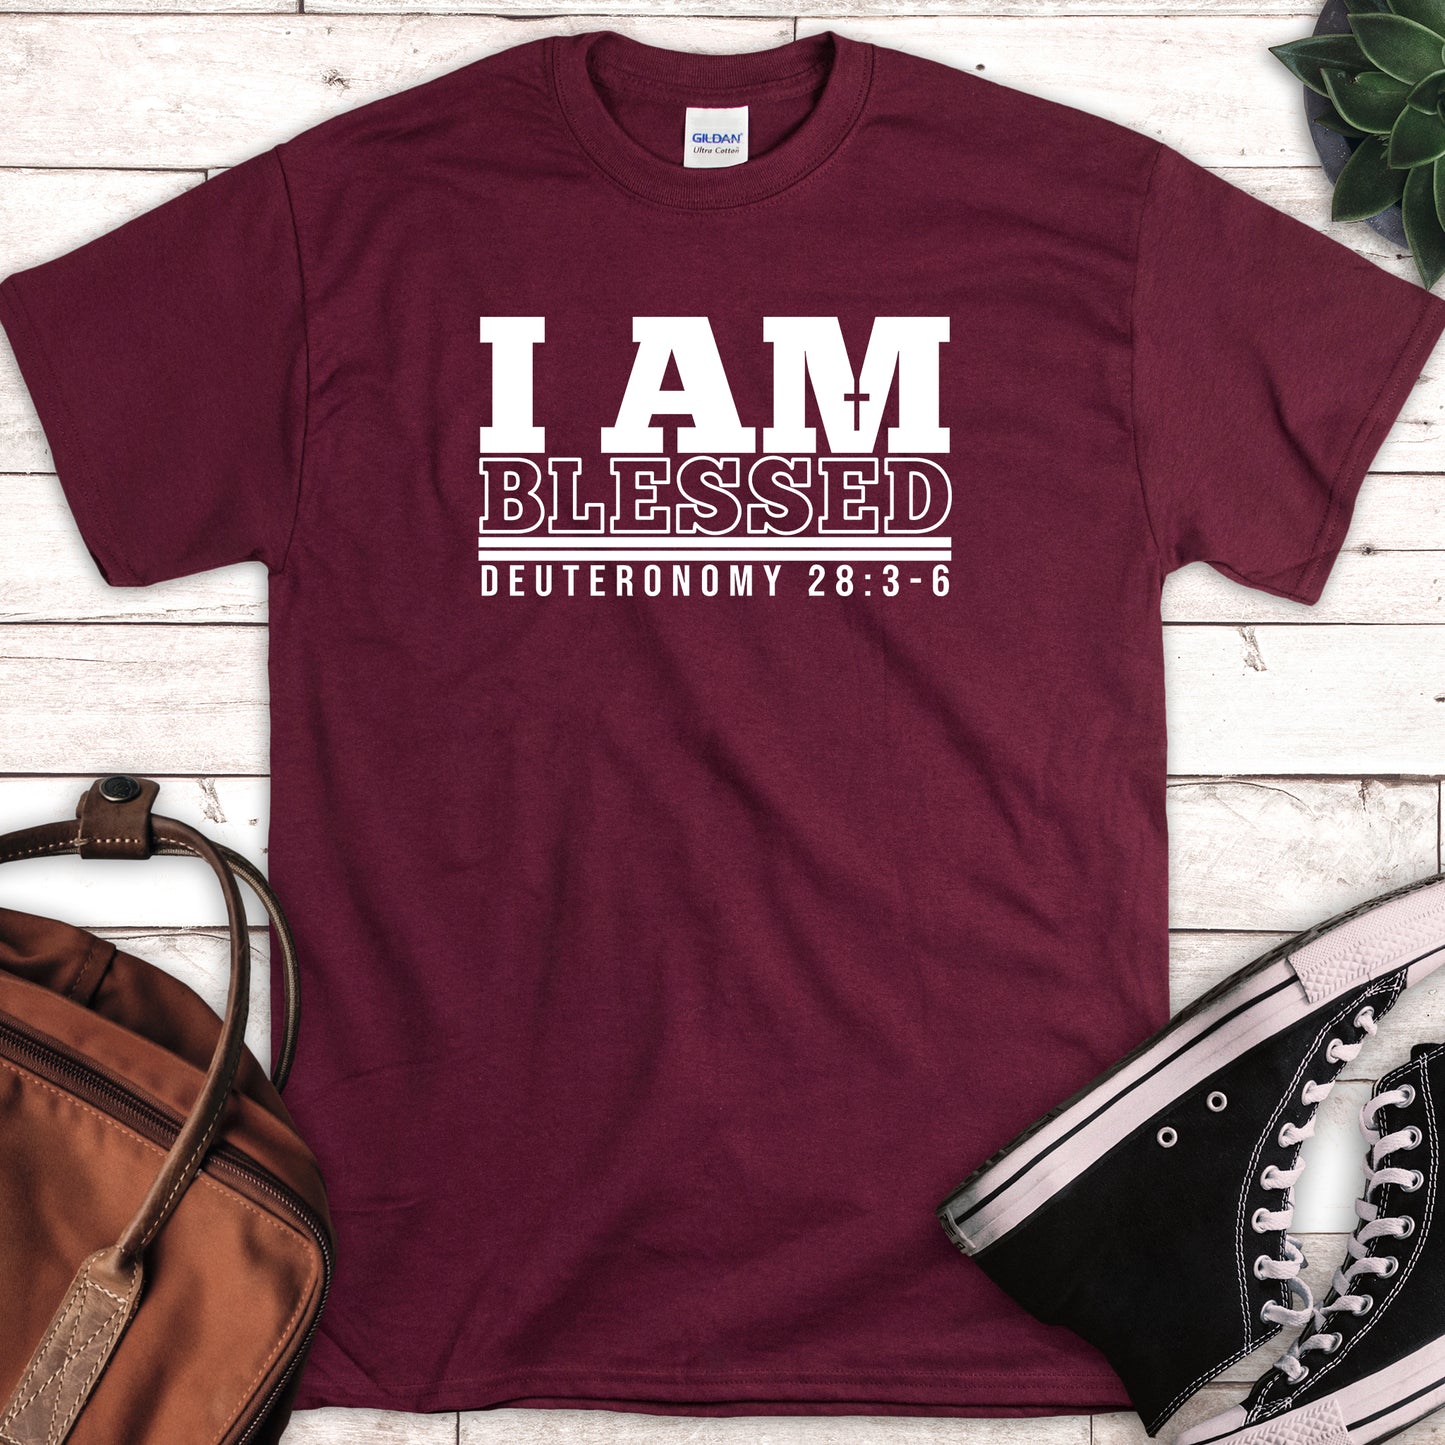 I am Blessed Shirt by Anointed T Shirts